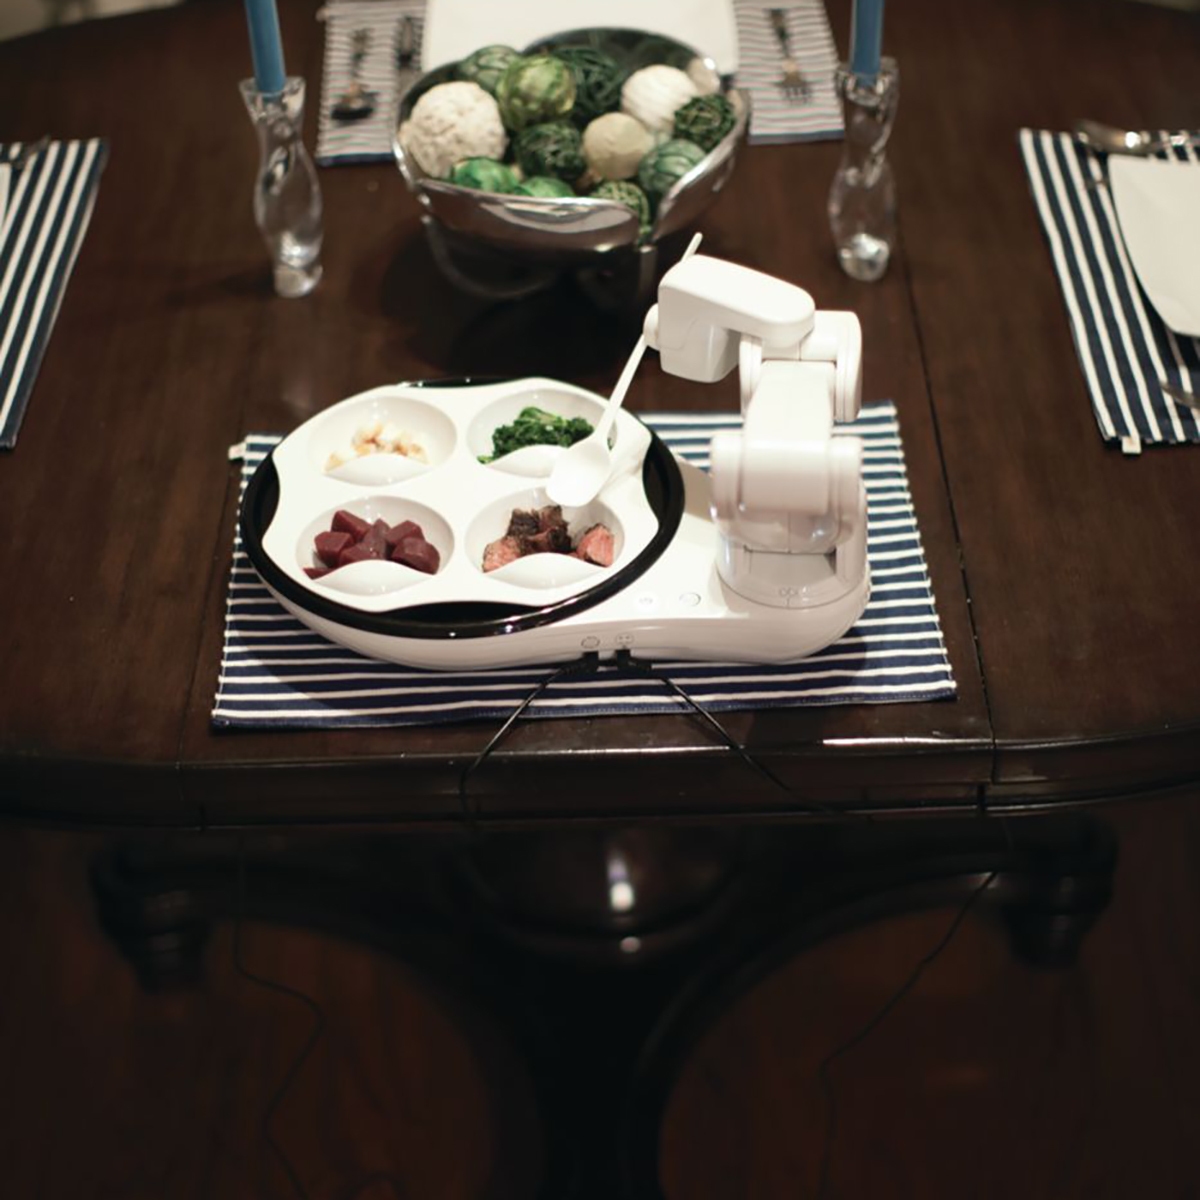 Obi feeding device for assisted dining